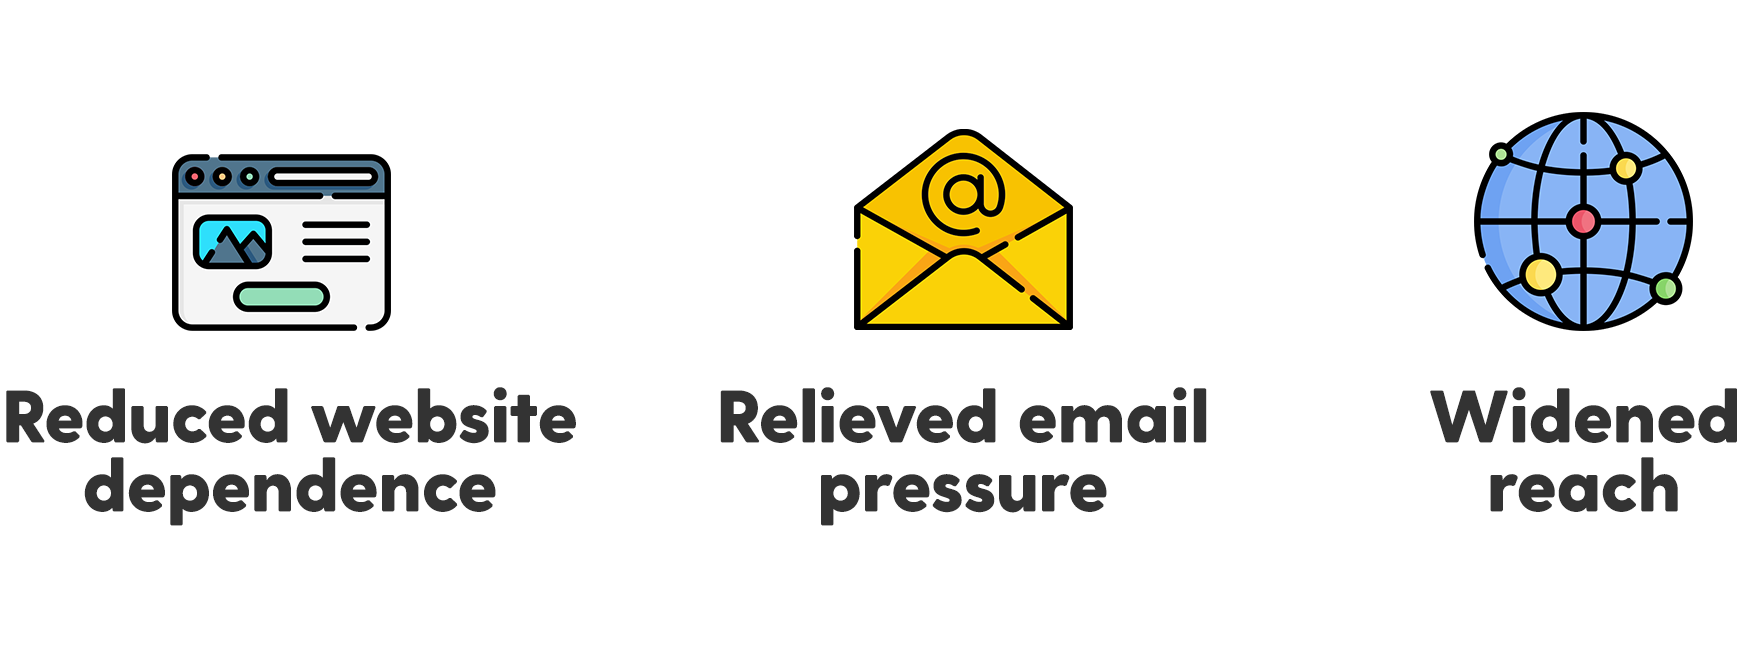 ✔️ Reduced website dependence ✔️ Relieved email pressure ✔️ Widened reach 